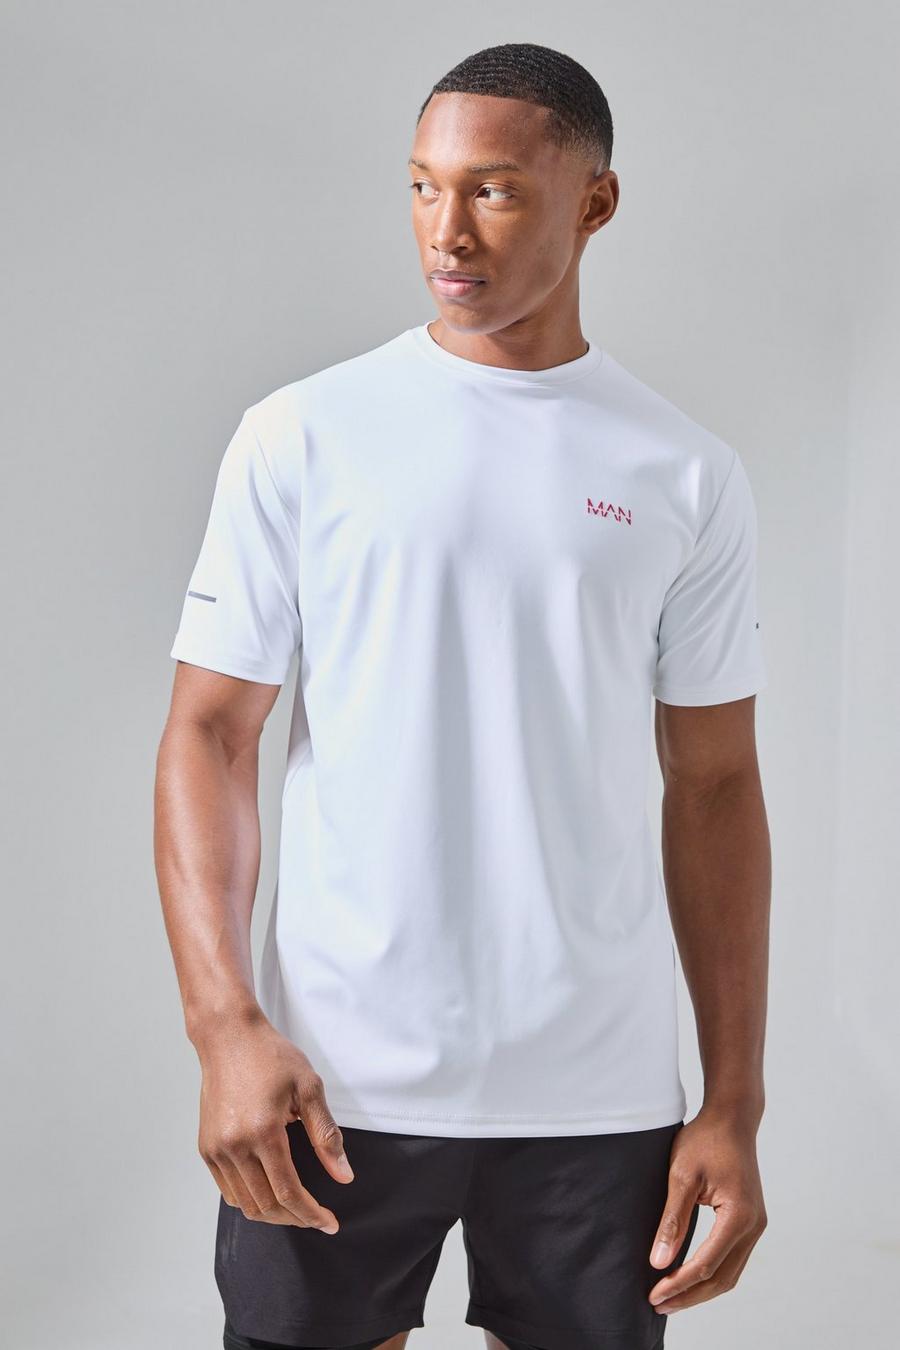 Man Active Performance T-Shirt, White image number 1